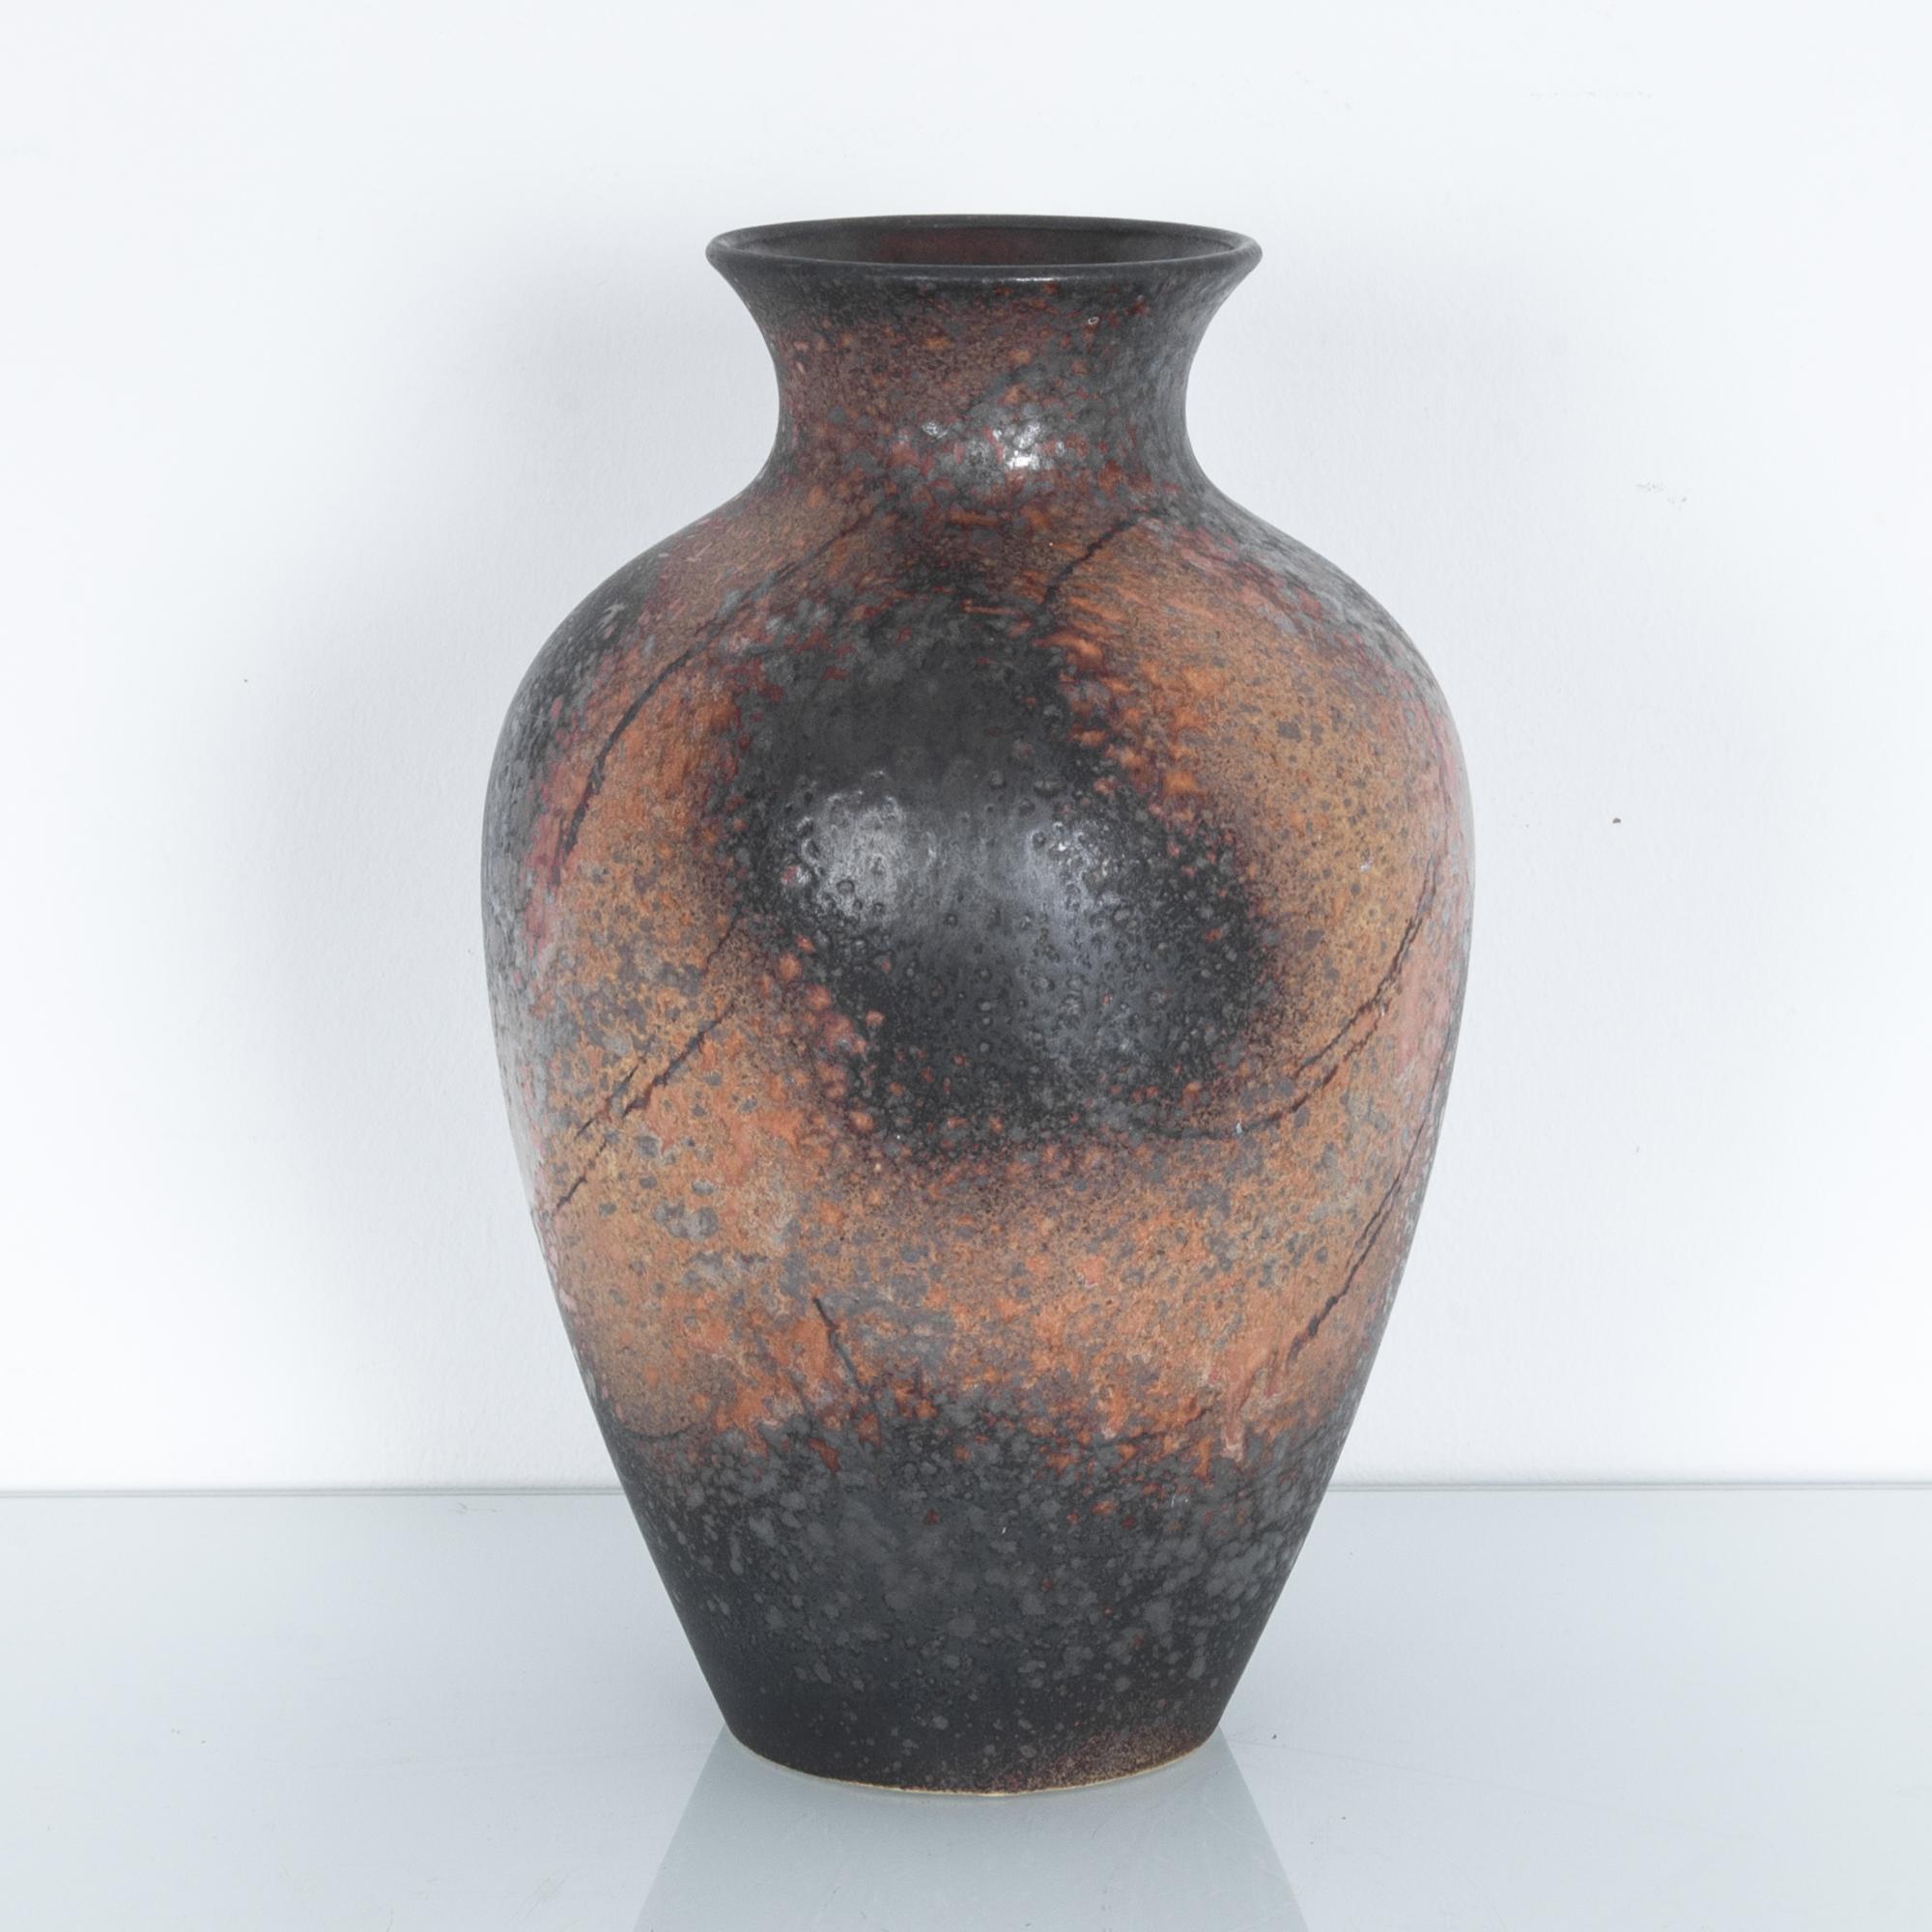 A ceramic vase produced in Germany, circa 1950. Glazed to highlight the natural texture of clay, a field of mottled orange and black. These characteristic mid-20th century ceramics were made in West Germany by a range of makers. High quality